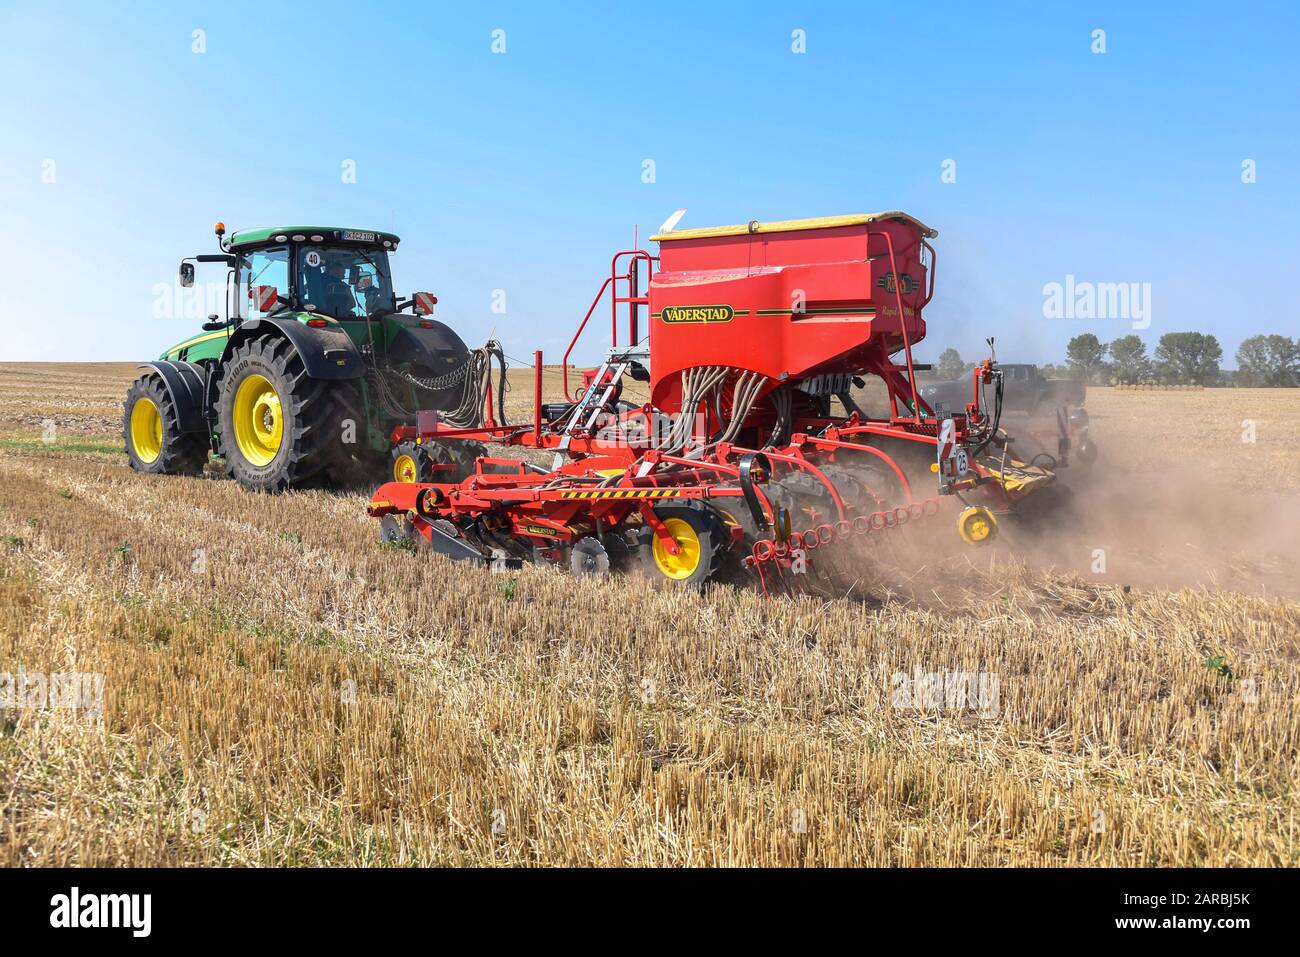 Hamersleben, Germany. 26th Aug, 2019. A high-tech tractor of the agricultural cooperative eG Hamersleben pulls a seed drill behind it for sowing. The machine inserts seeds individually and with centimetre precision into the soil. Credit: Stephan Schulz/dpa-Zentralbild/ZB/dpa/Alamy Live News Stock Photo